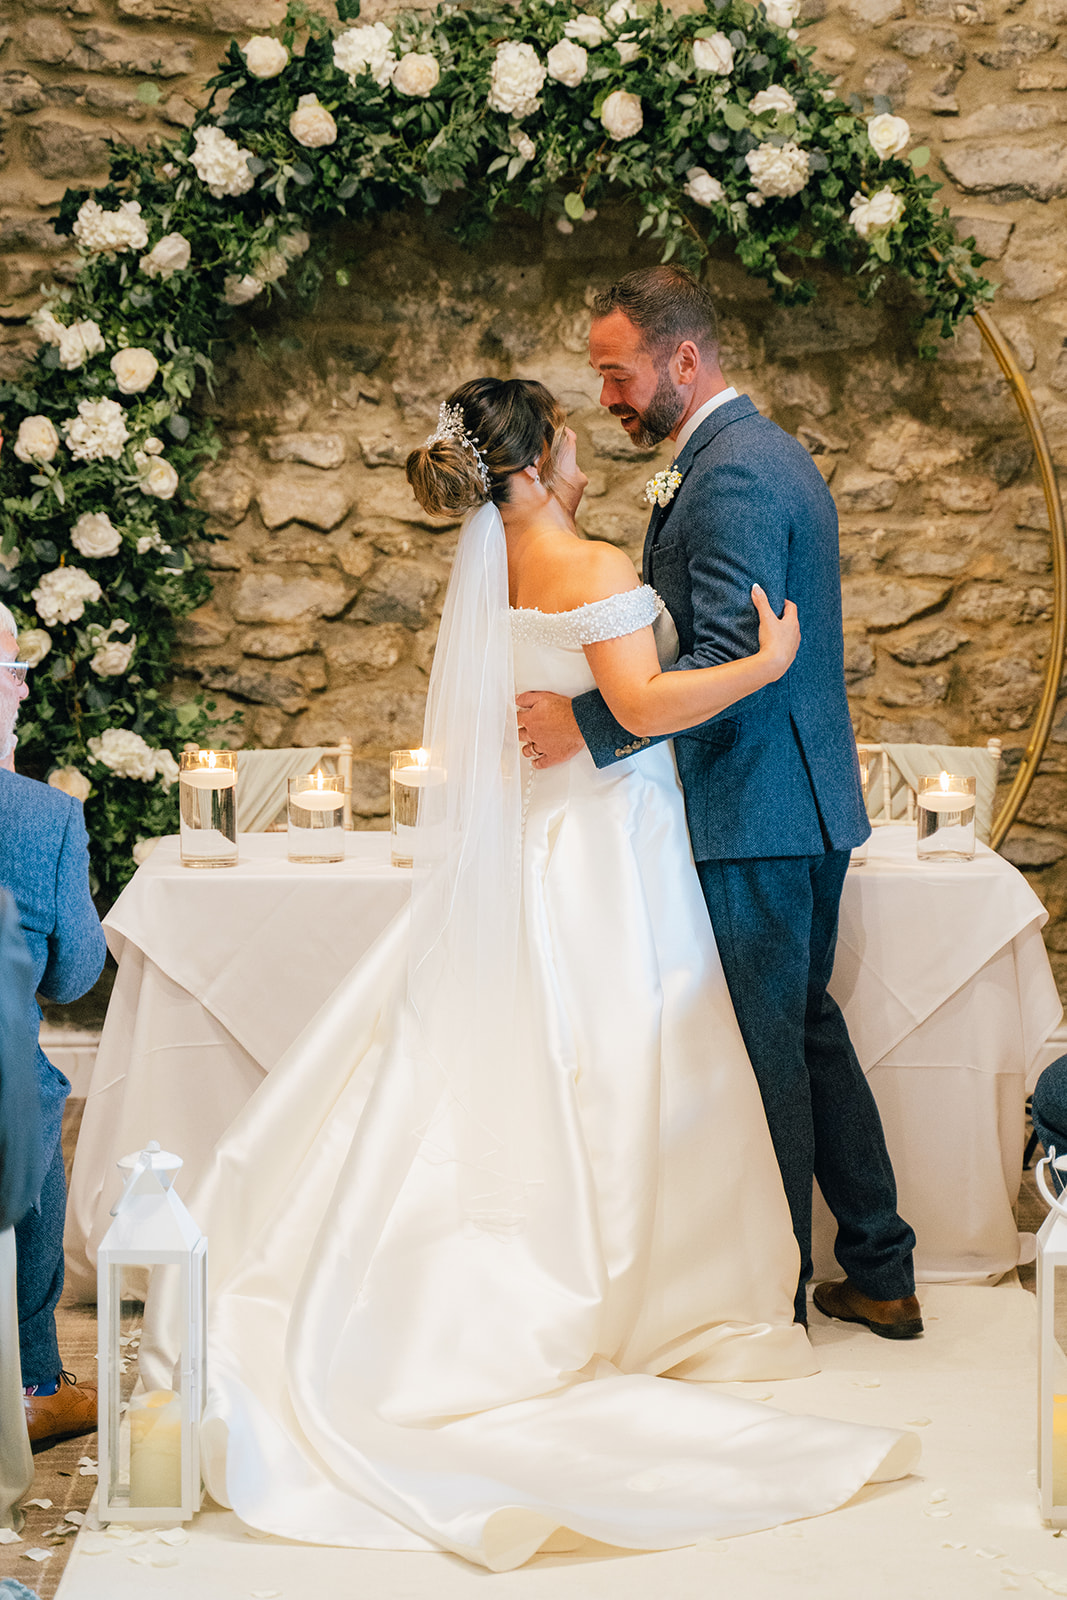 Wedding photographs of the ceremony at the Coniston Hotel